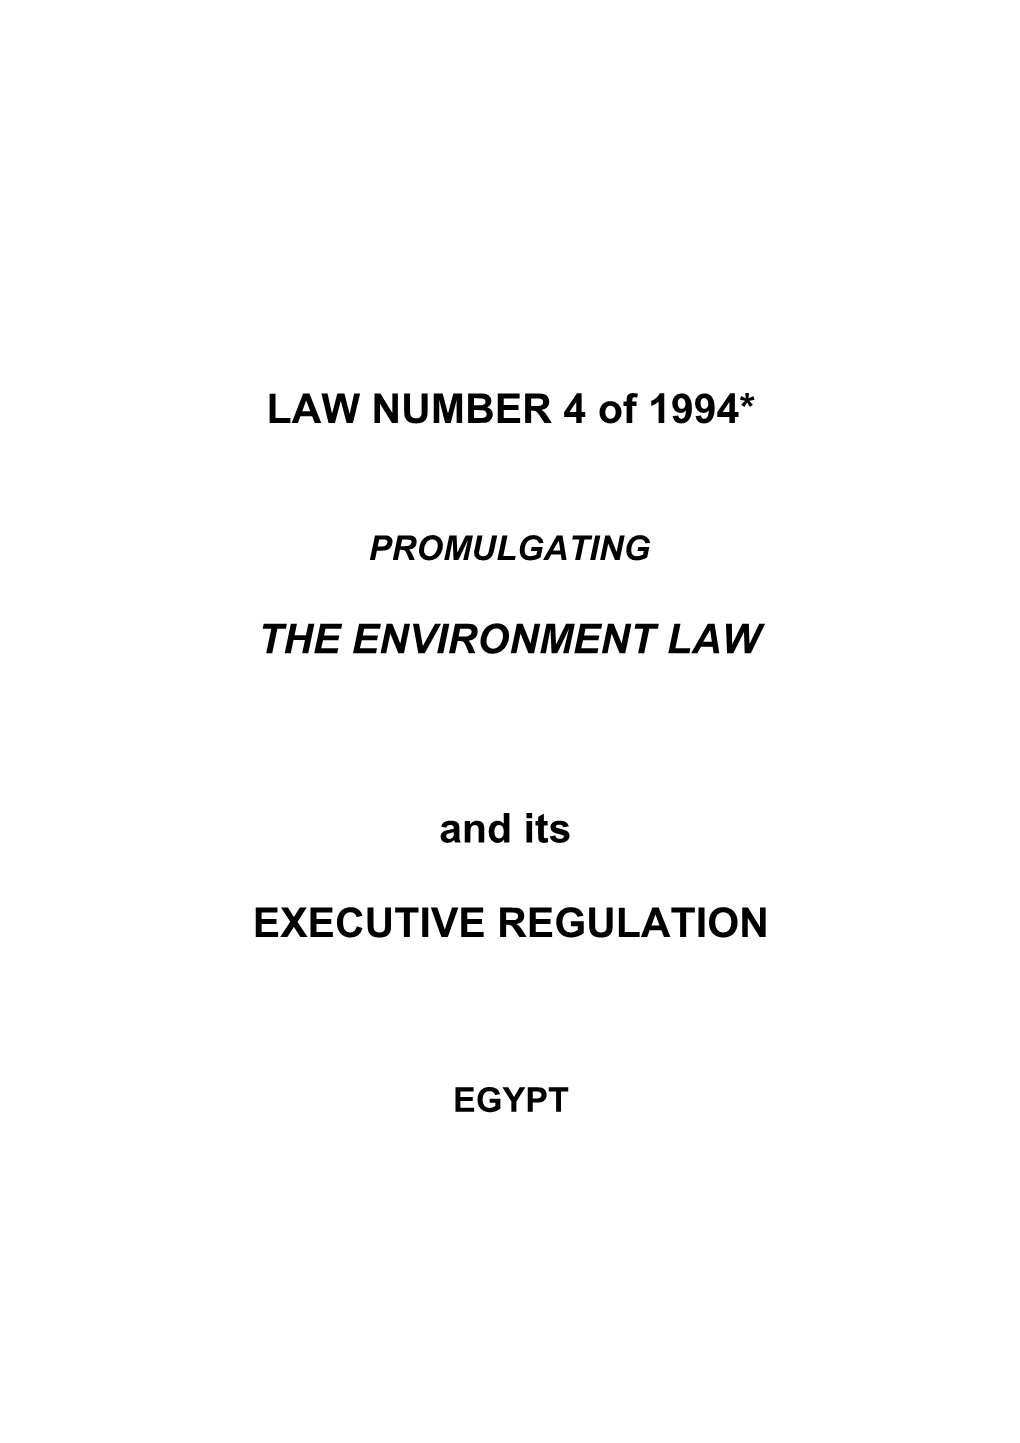 LAW NUMBER 4 of 1994* s1